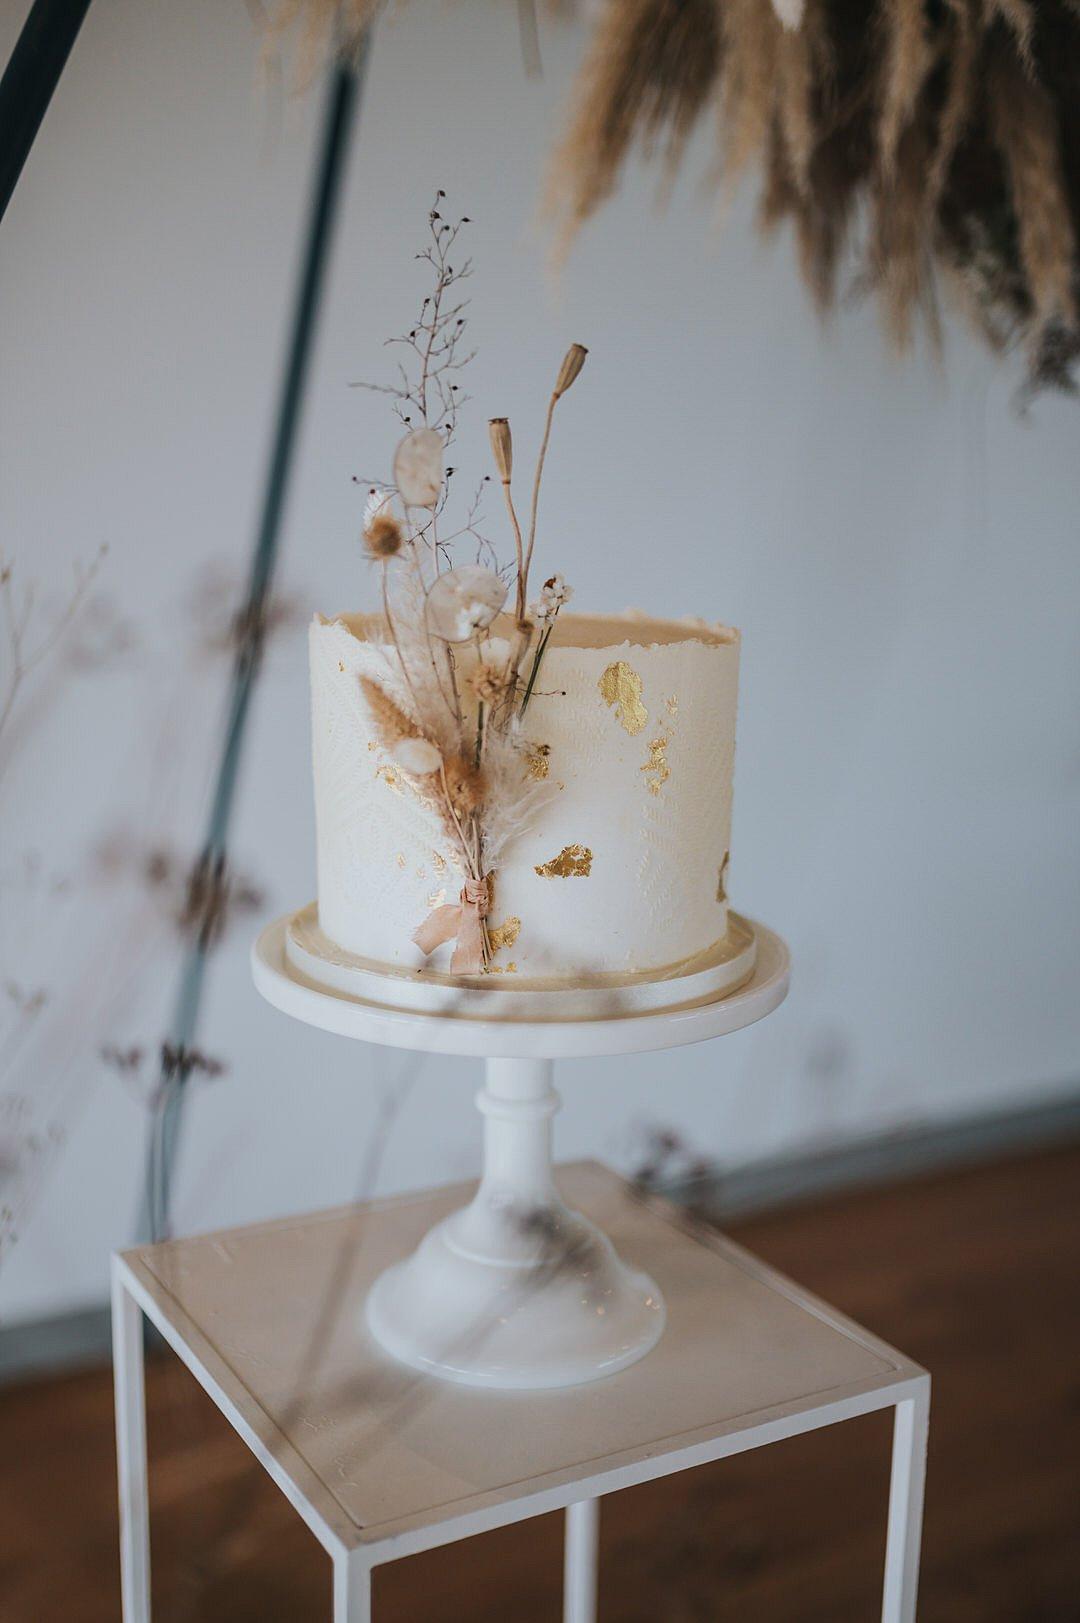 10 Easy Ways to Create a Simple and Elegant Wedding Cake of Your Own